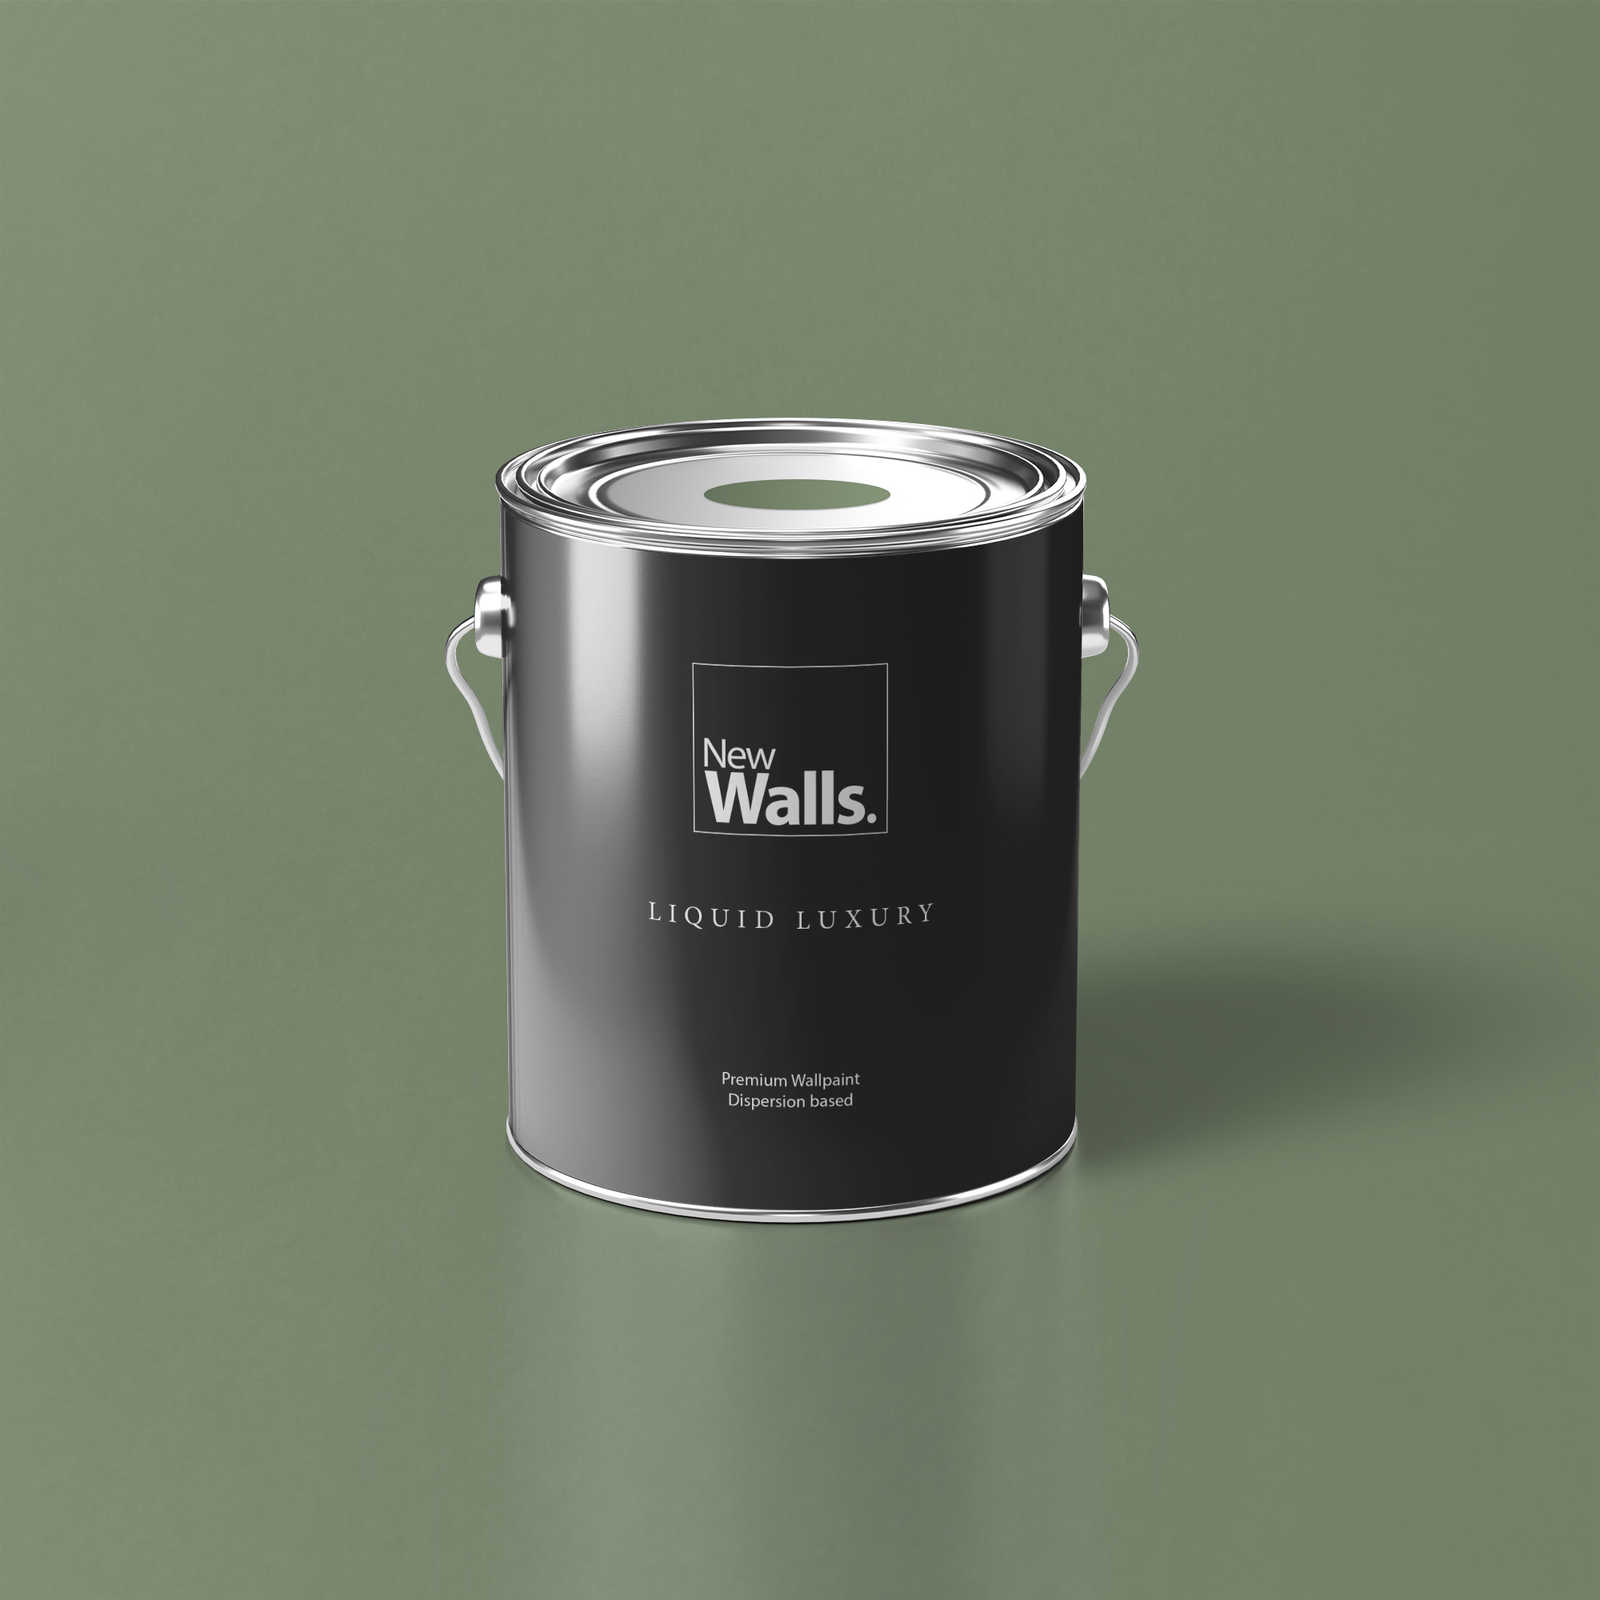 Premium Wall Paint Nature Olive Green »Gorgeous Green« NW503 – 5 litre
